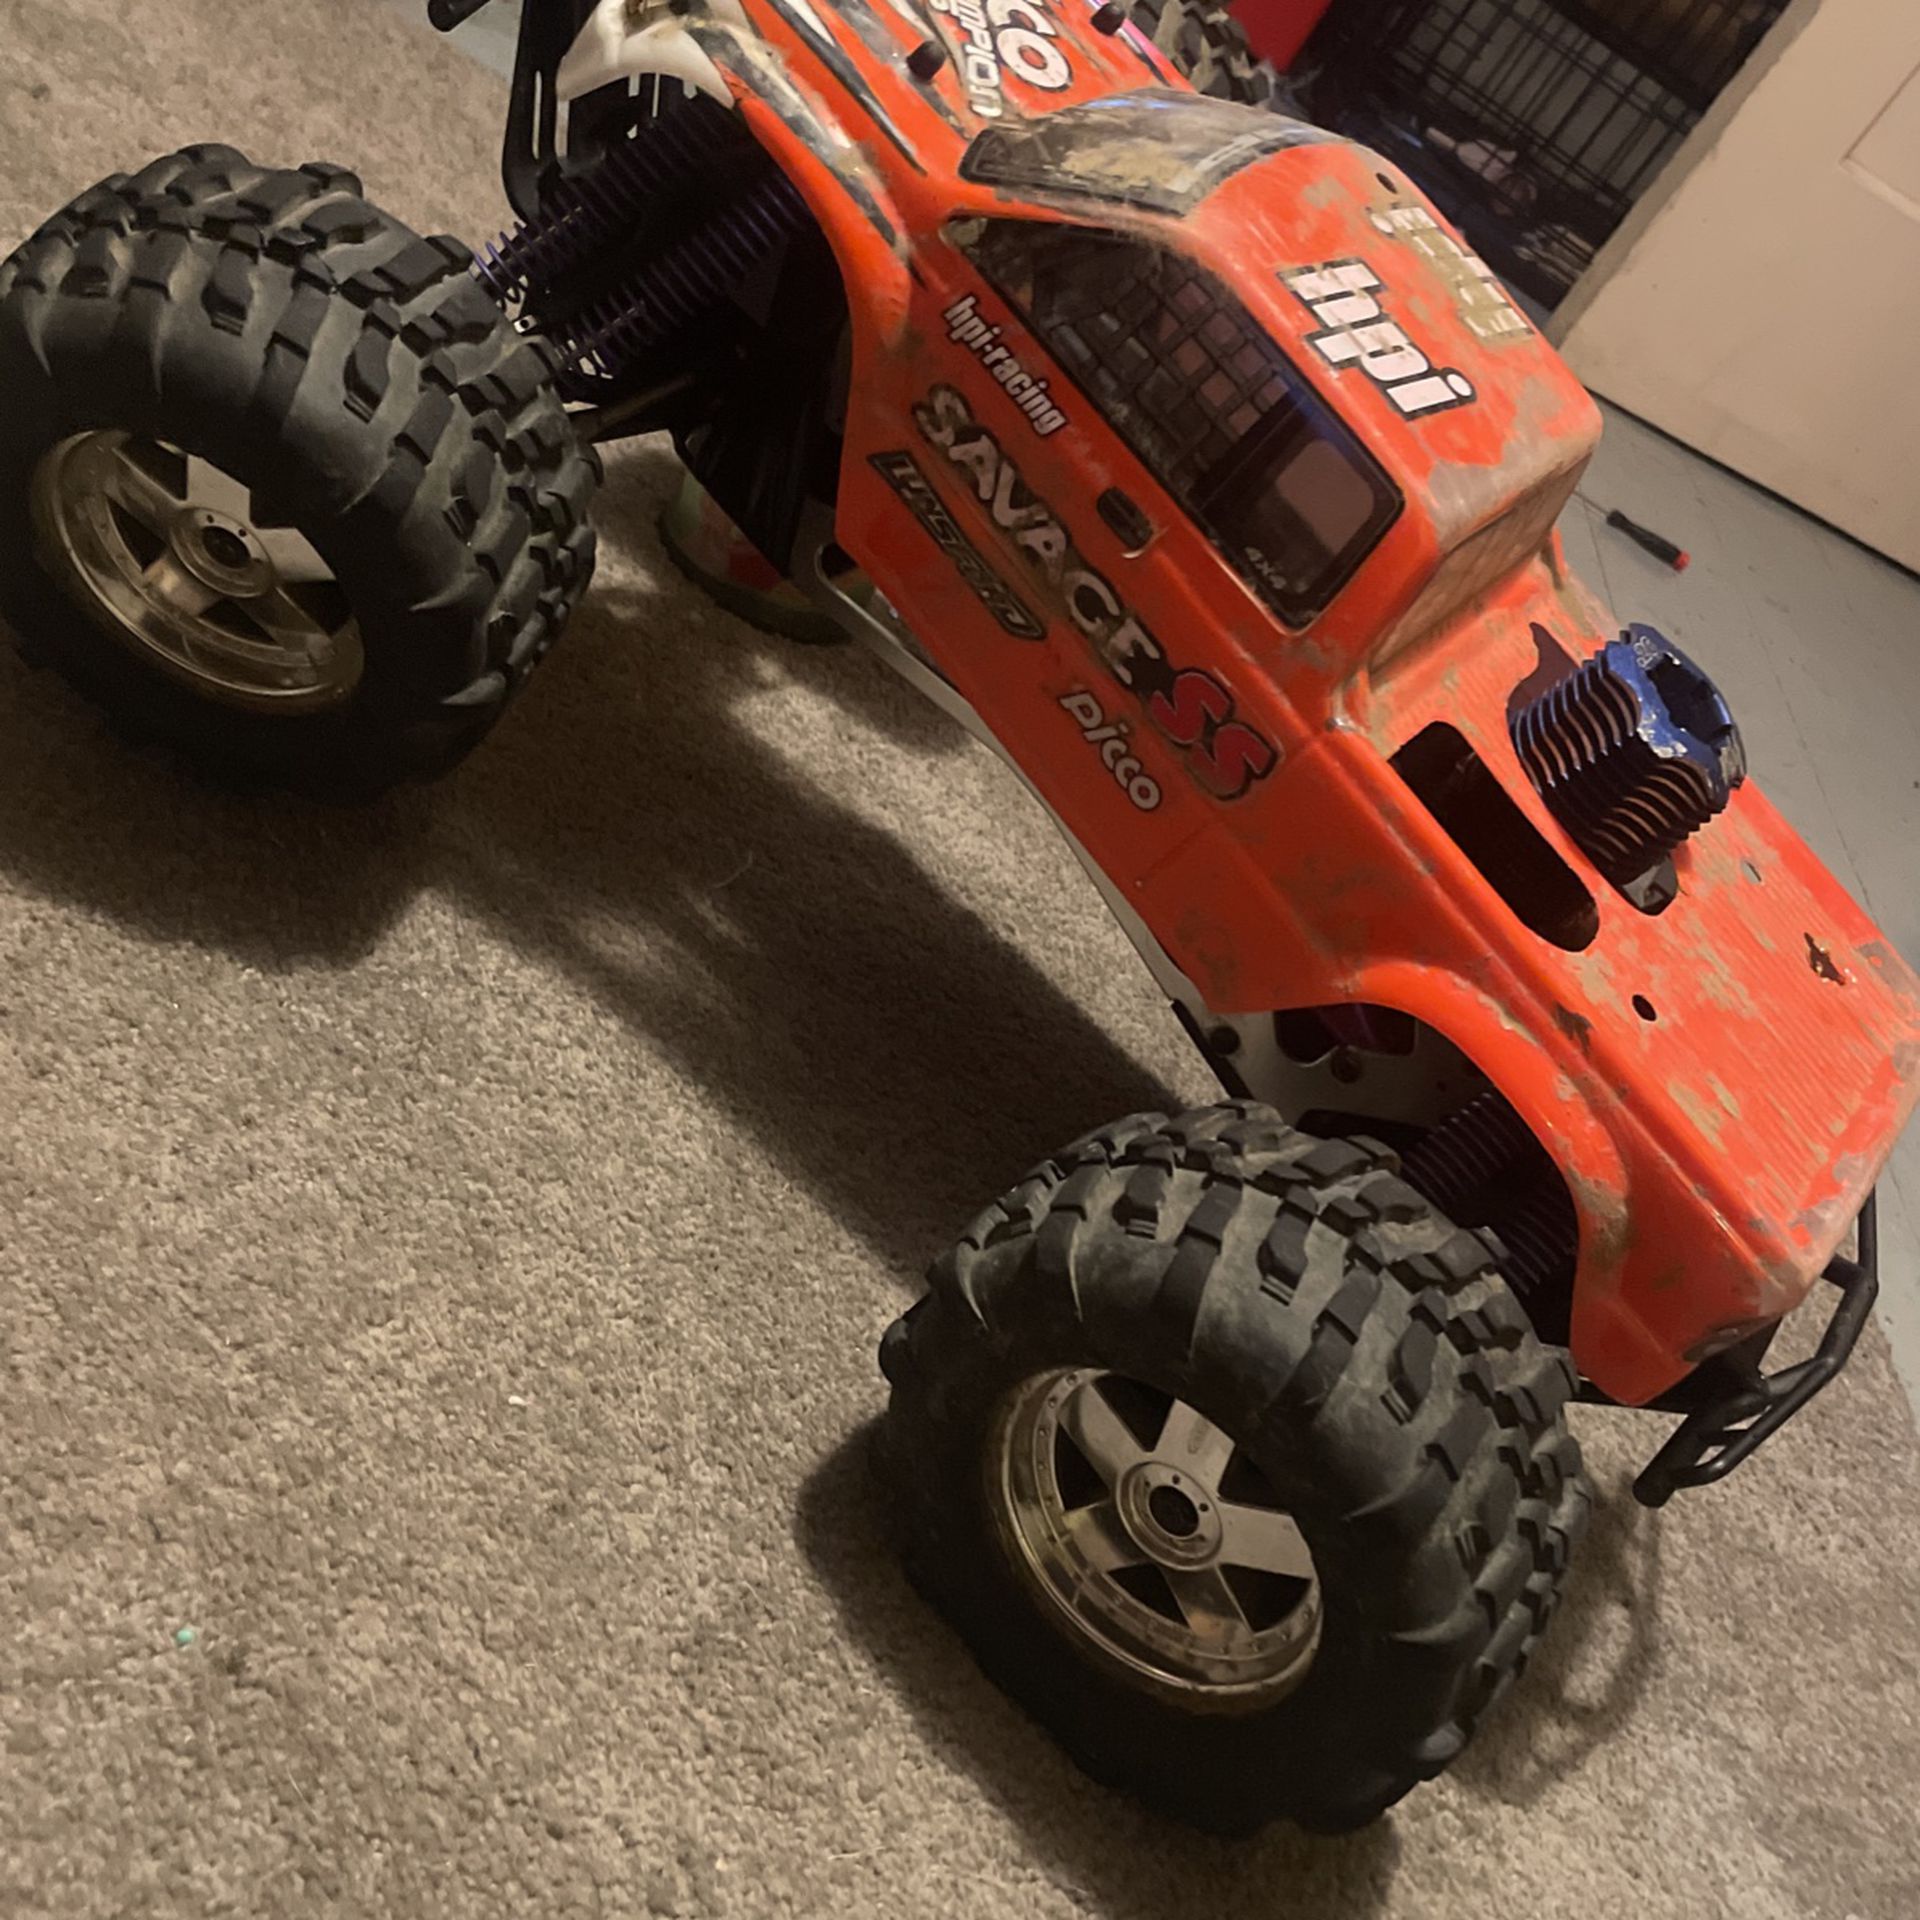 Nitro Rc And 2gallons Of Fuel 